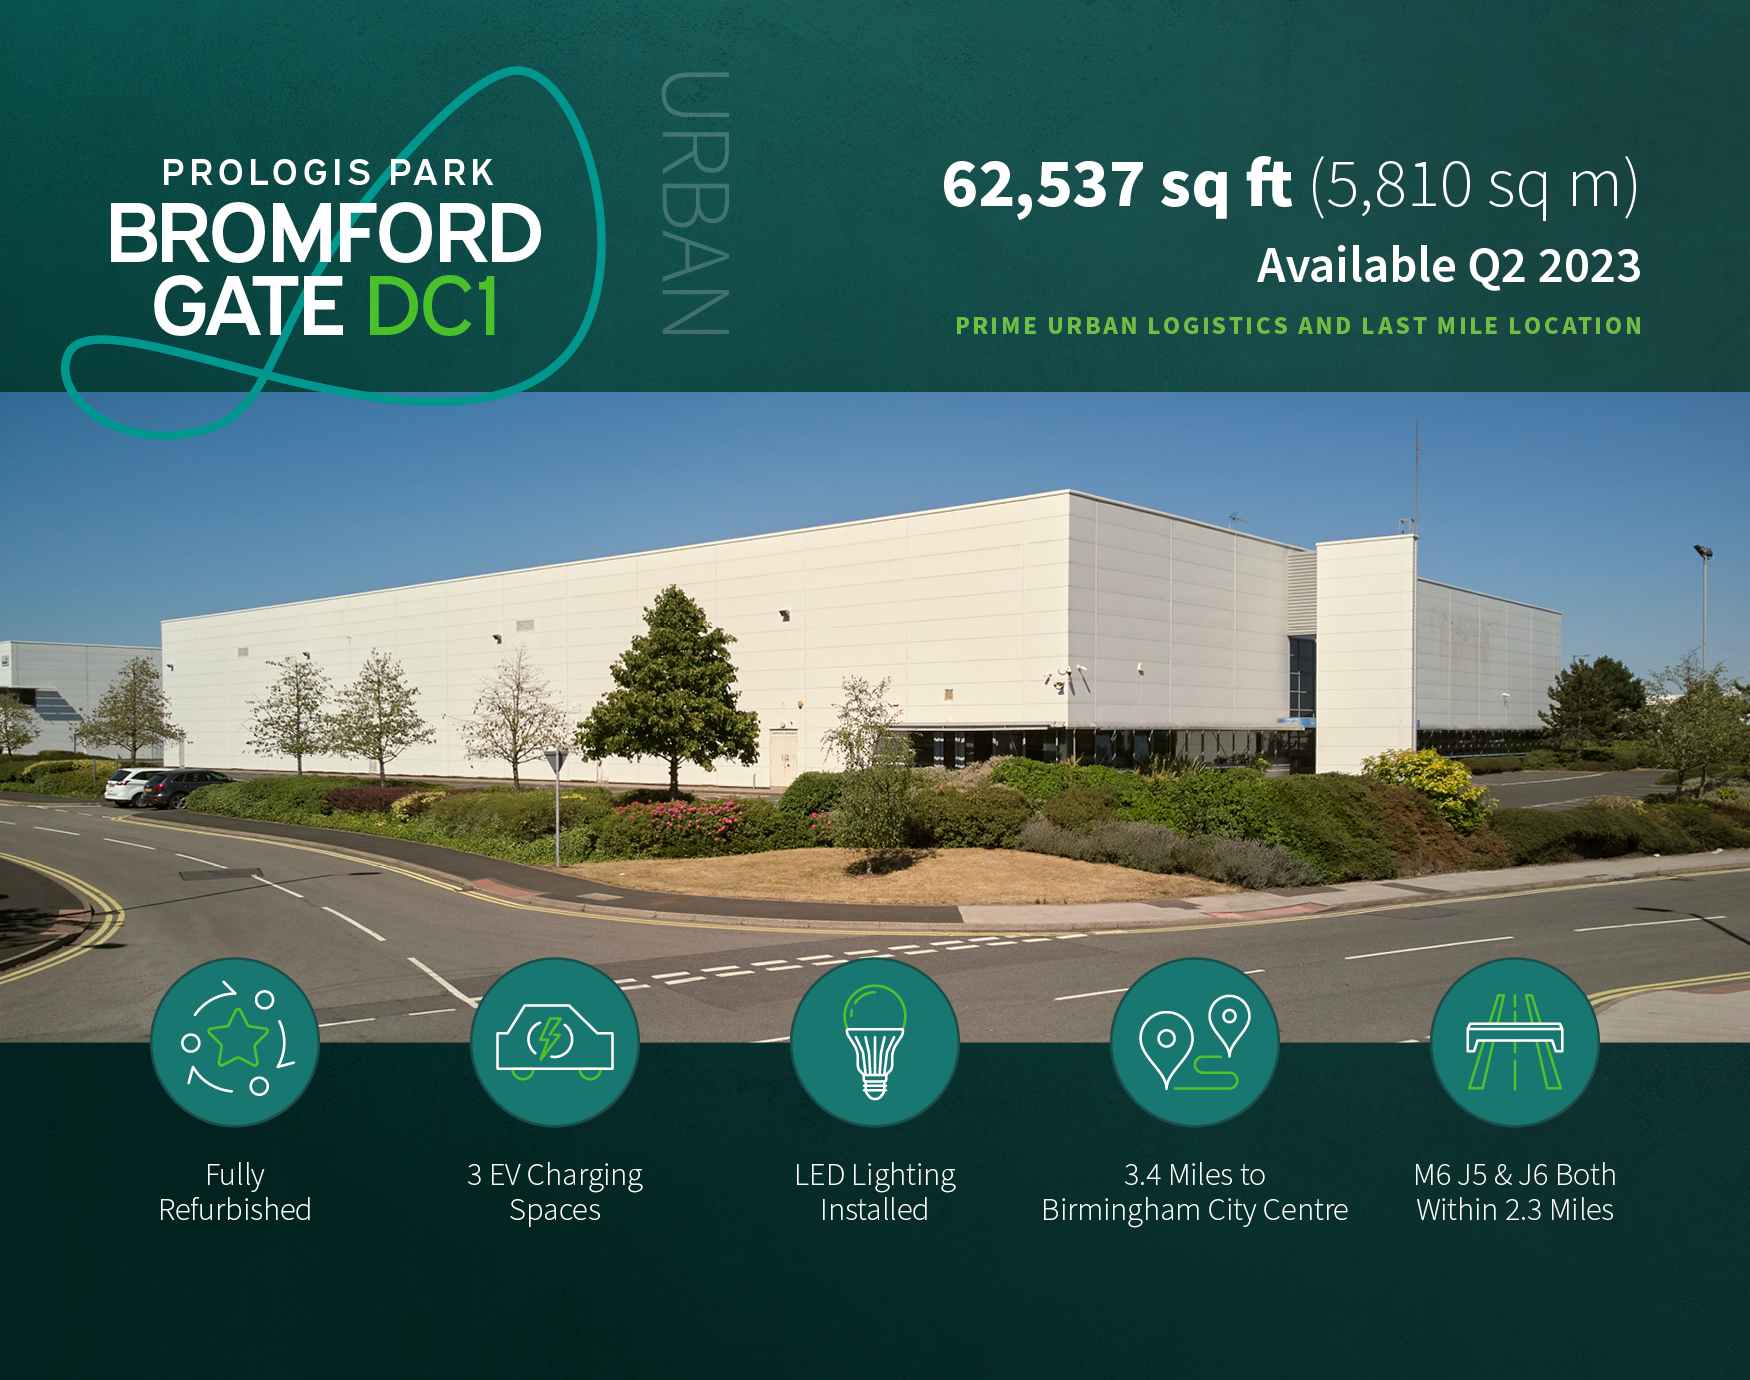 Bromford-Gate-DC1-graphic-card-overview.jpg